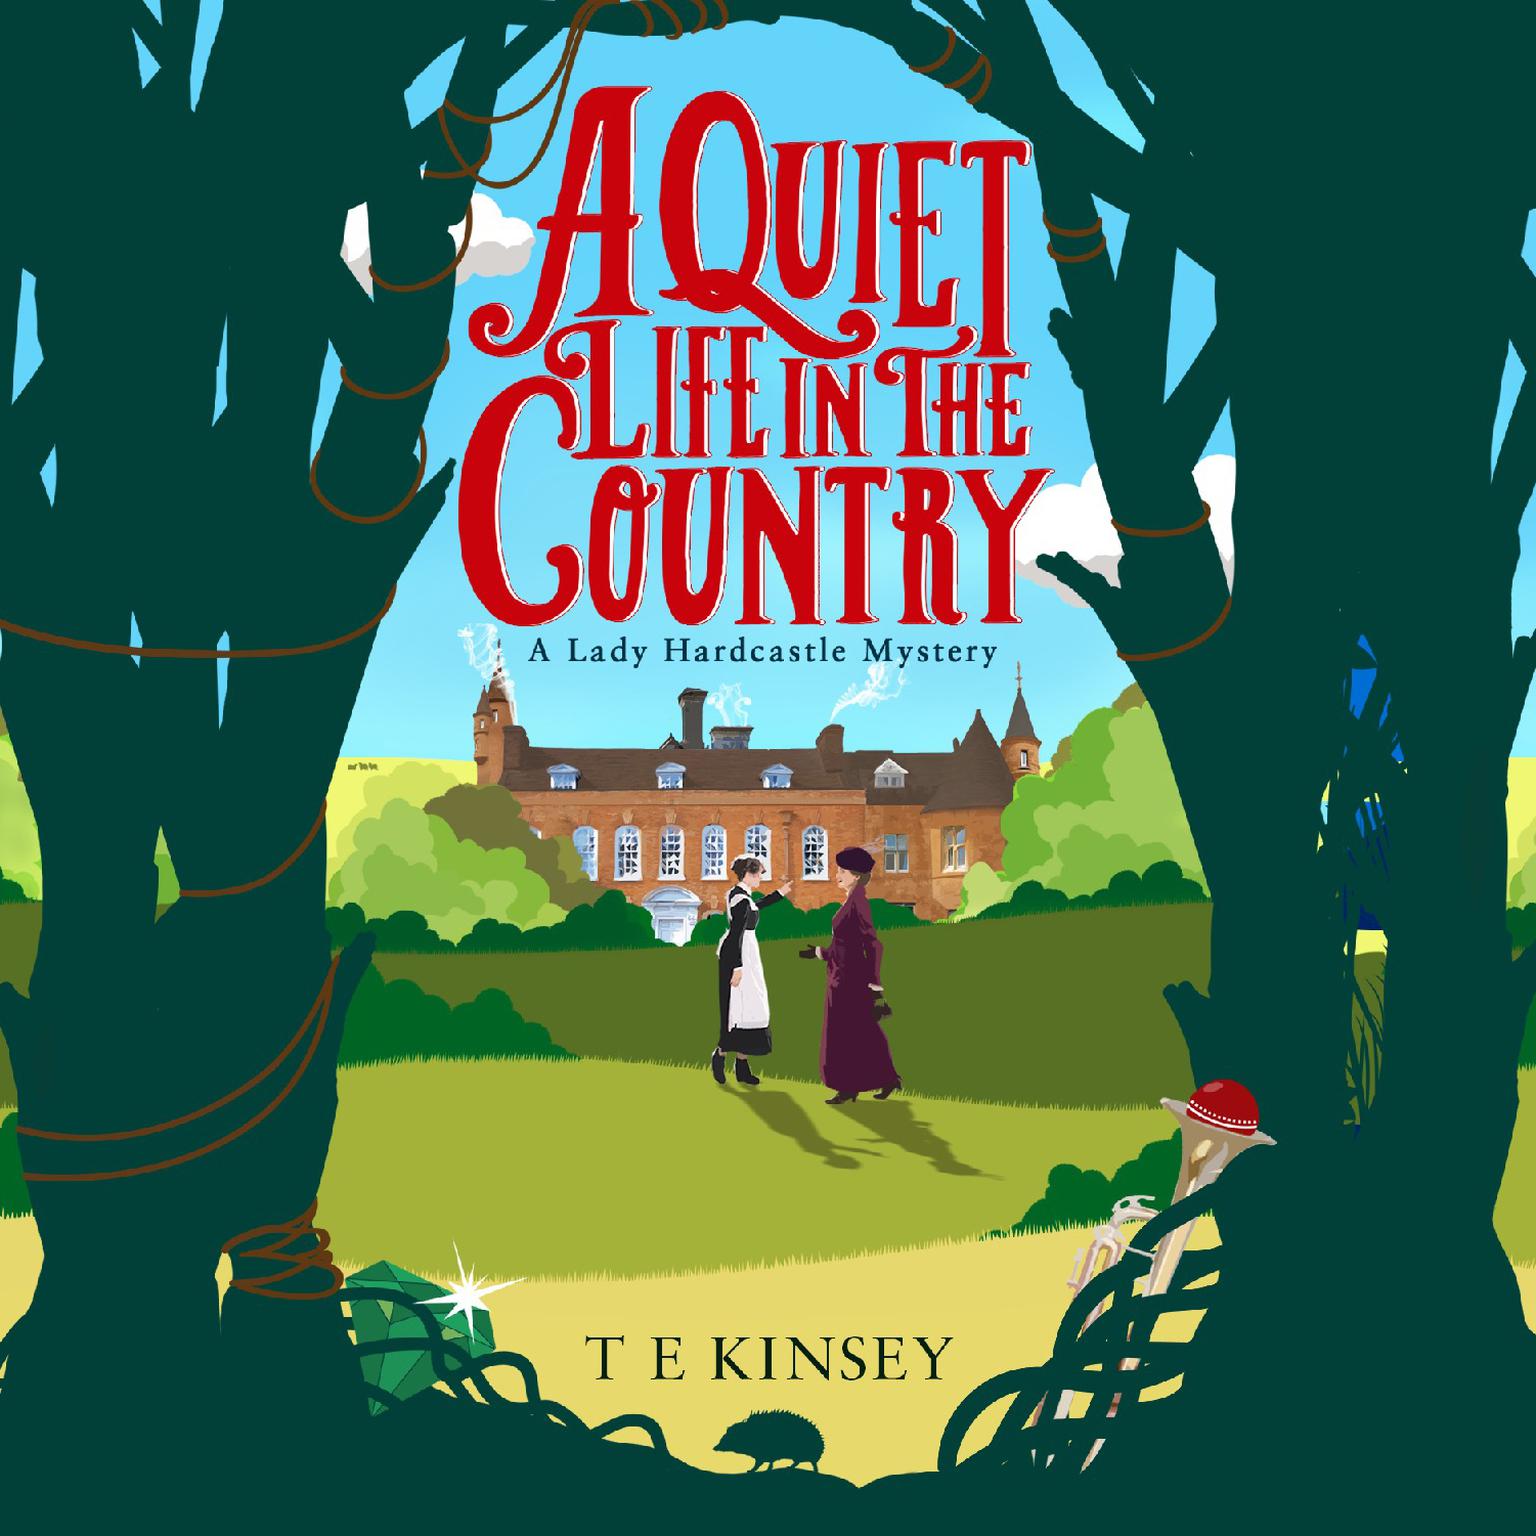 A Quiet Life In The Country: A Lady Hardcastle Mystery Audiobook, by T. E. Kinsey